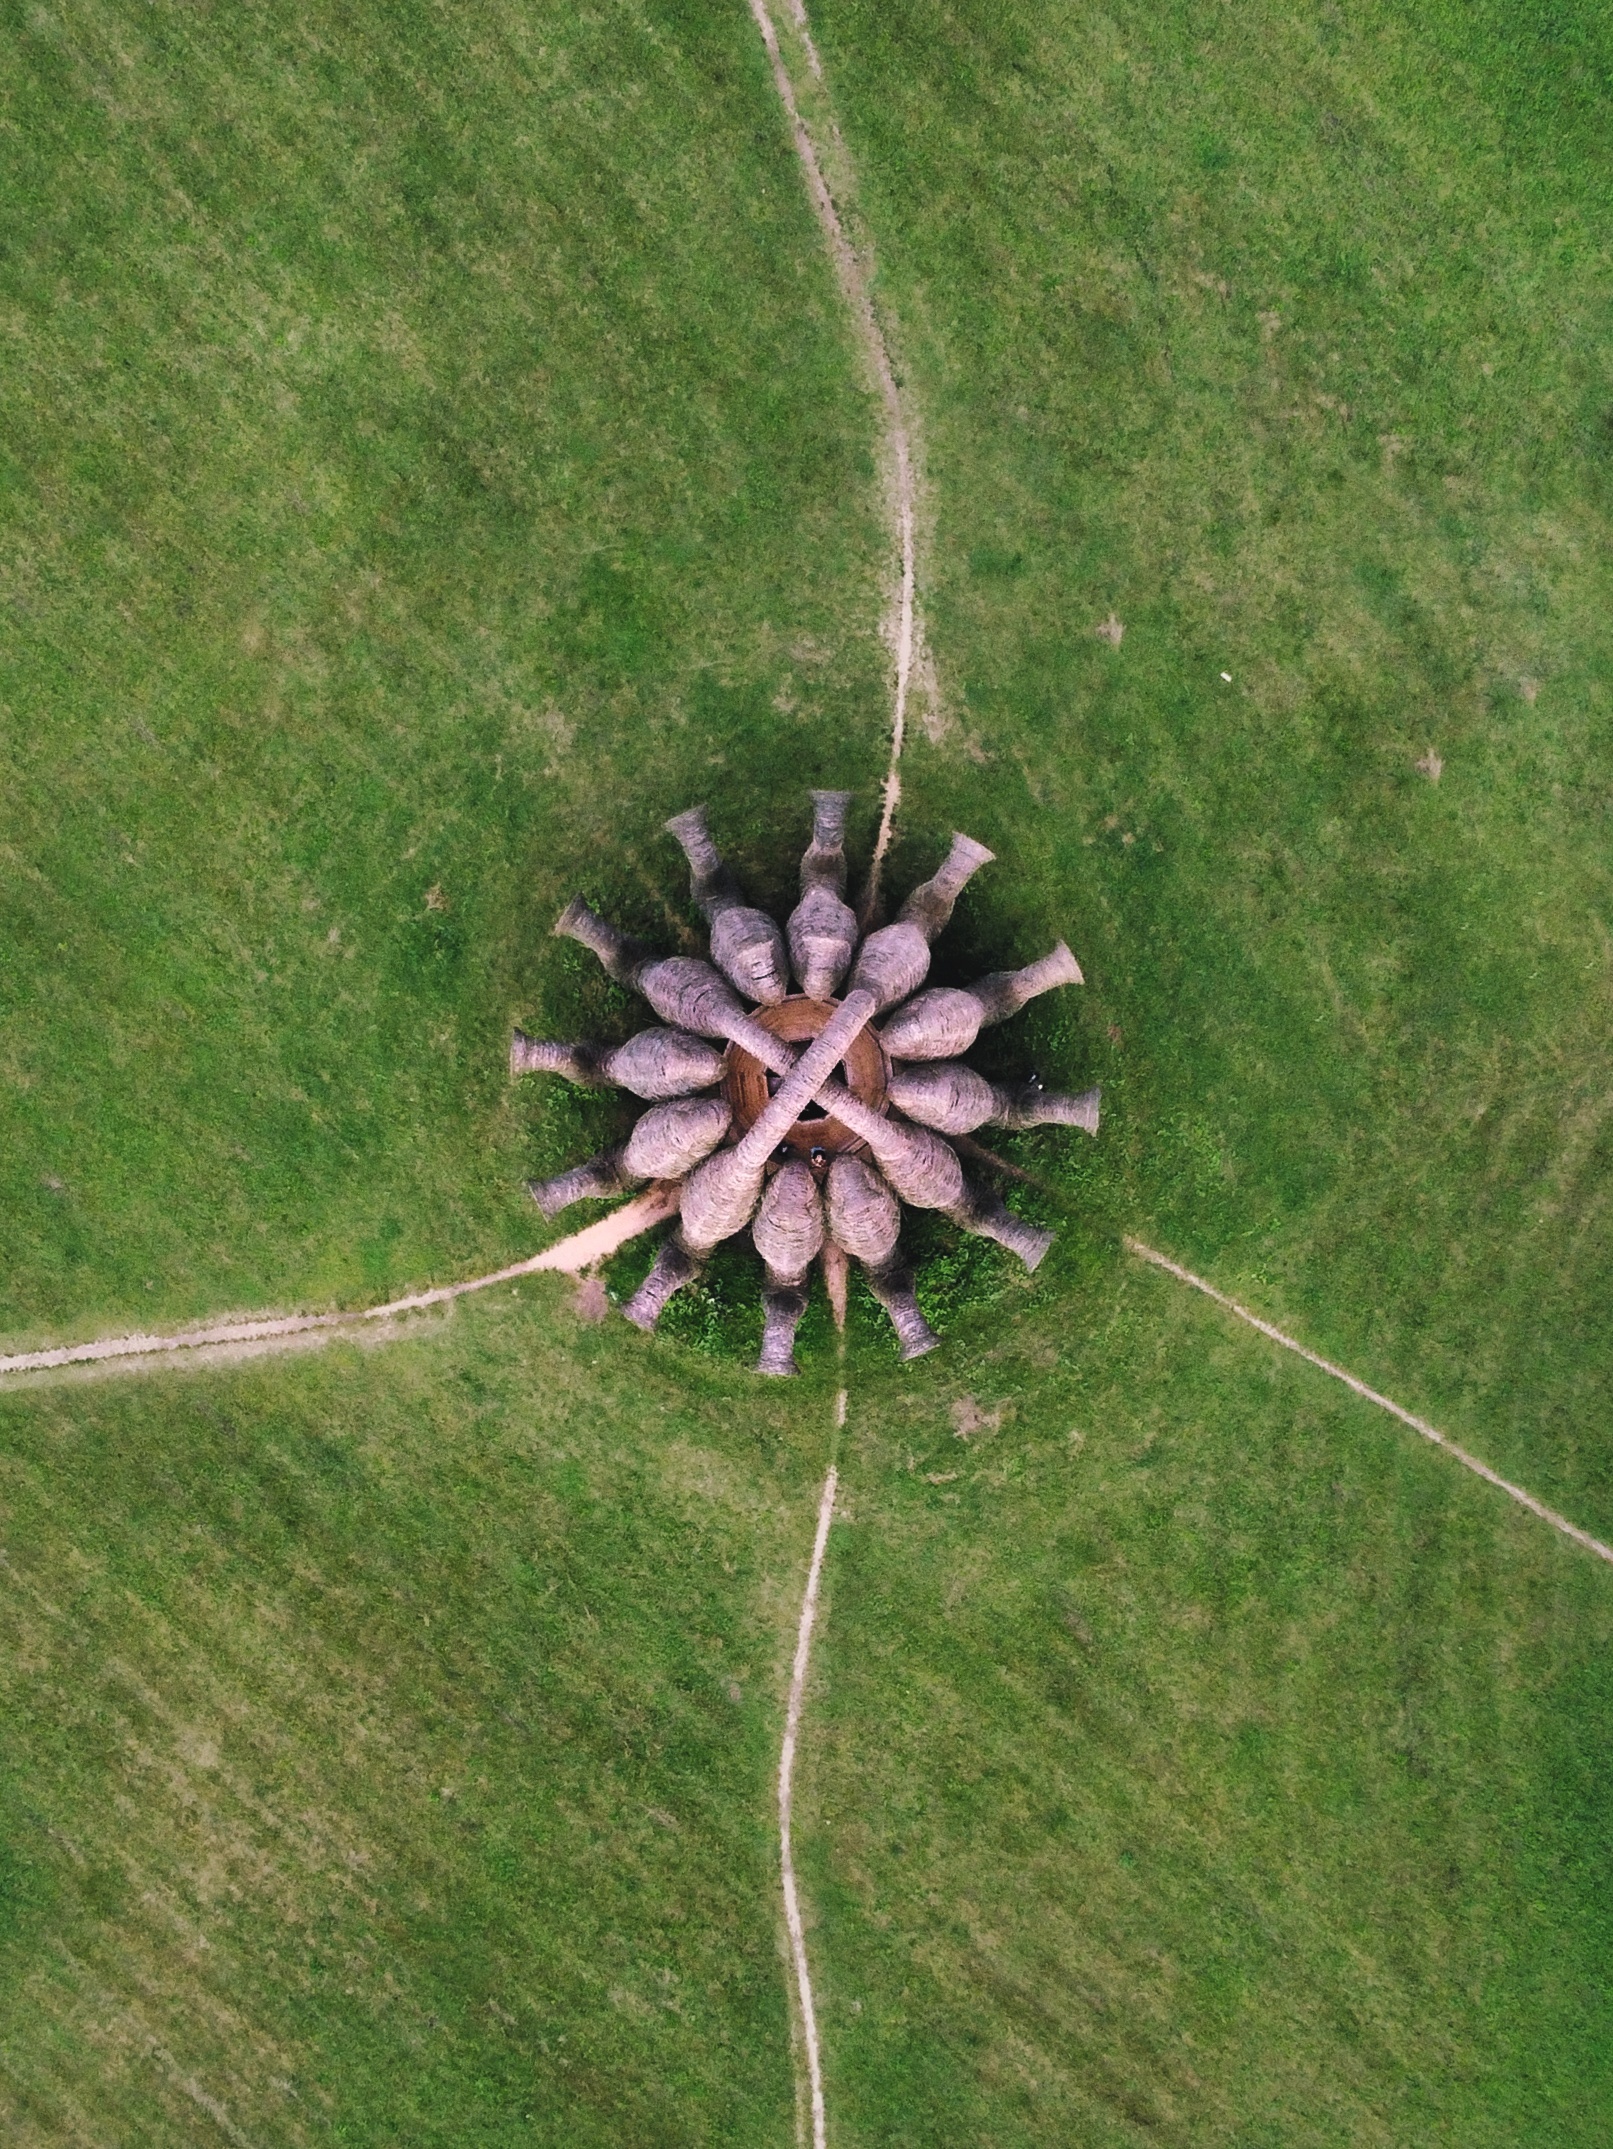 Nikola-Lenivets from a drone - My, Drone, Quadcopter, Dji, The photo, Nature, sights, Russia, Kaluga, , Nikola-Lenivets, Ugra, Photoshop, Photographer, Flight, Longpost